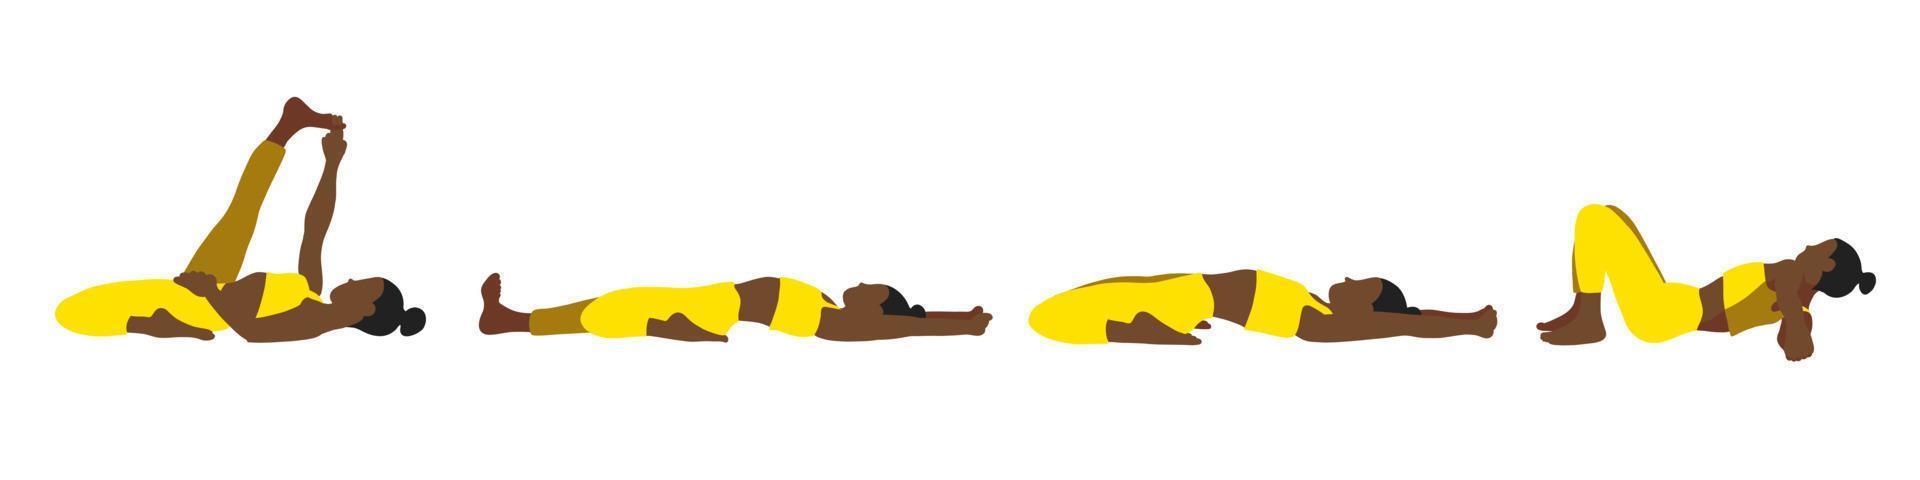 Yoga poses collection. African American. Female woman girl. Vector illustration in cartoon flat style isolated on white background.